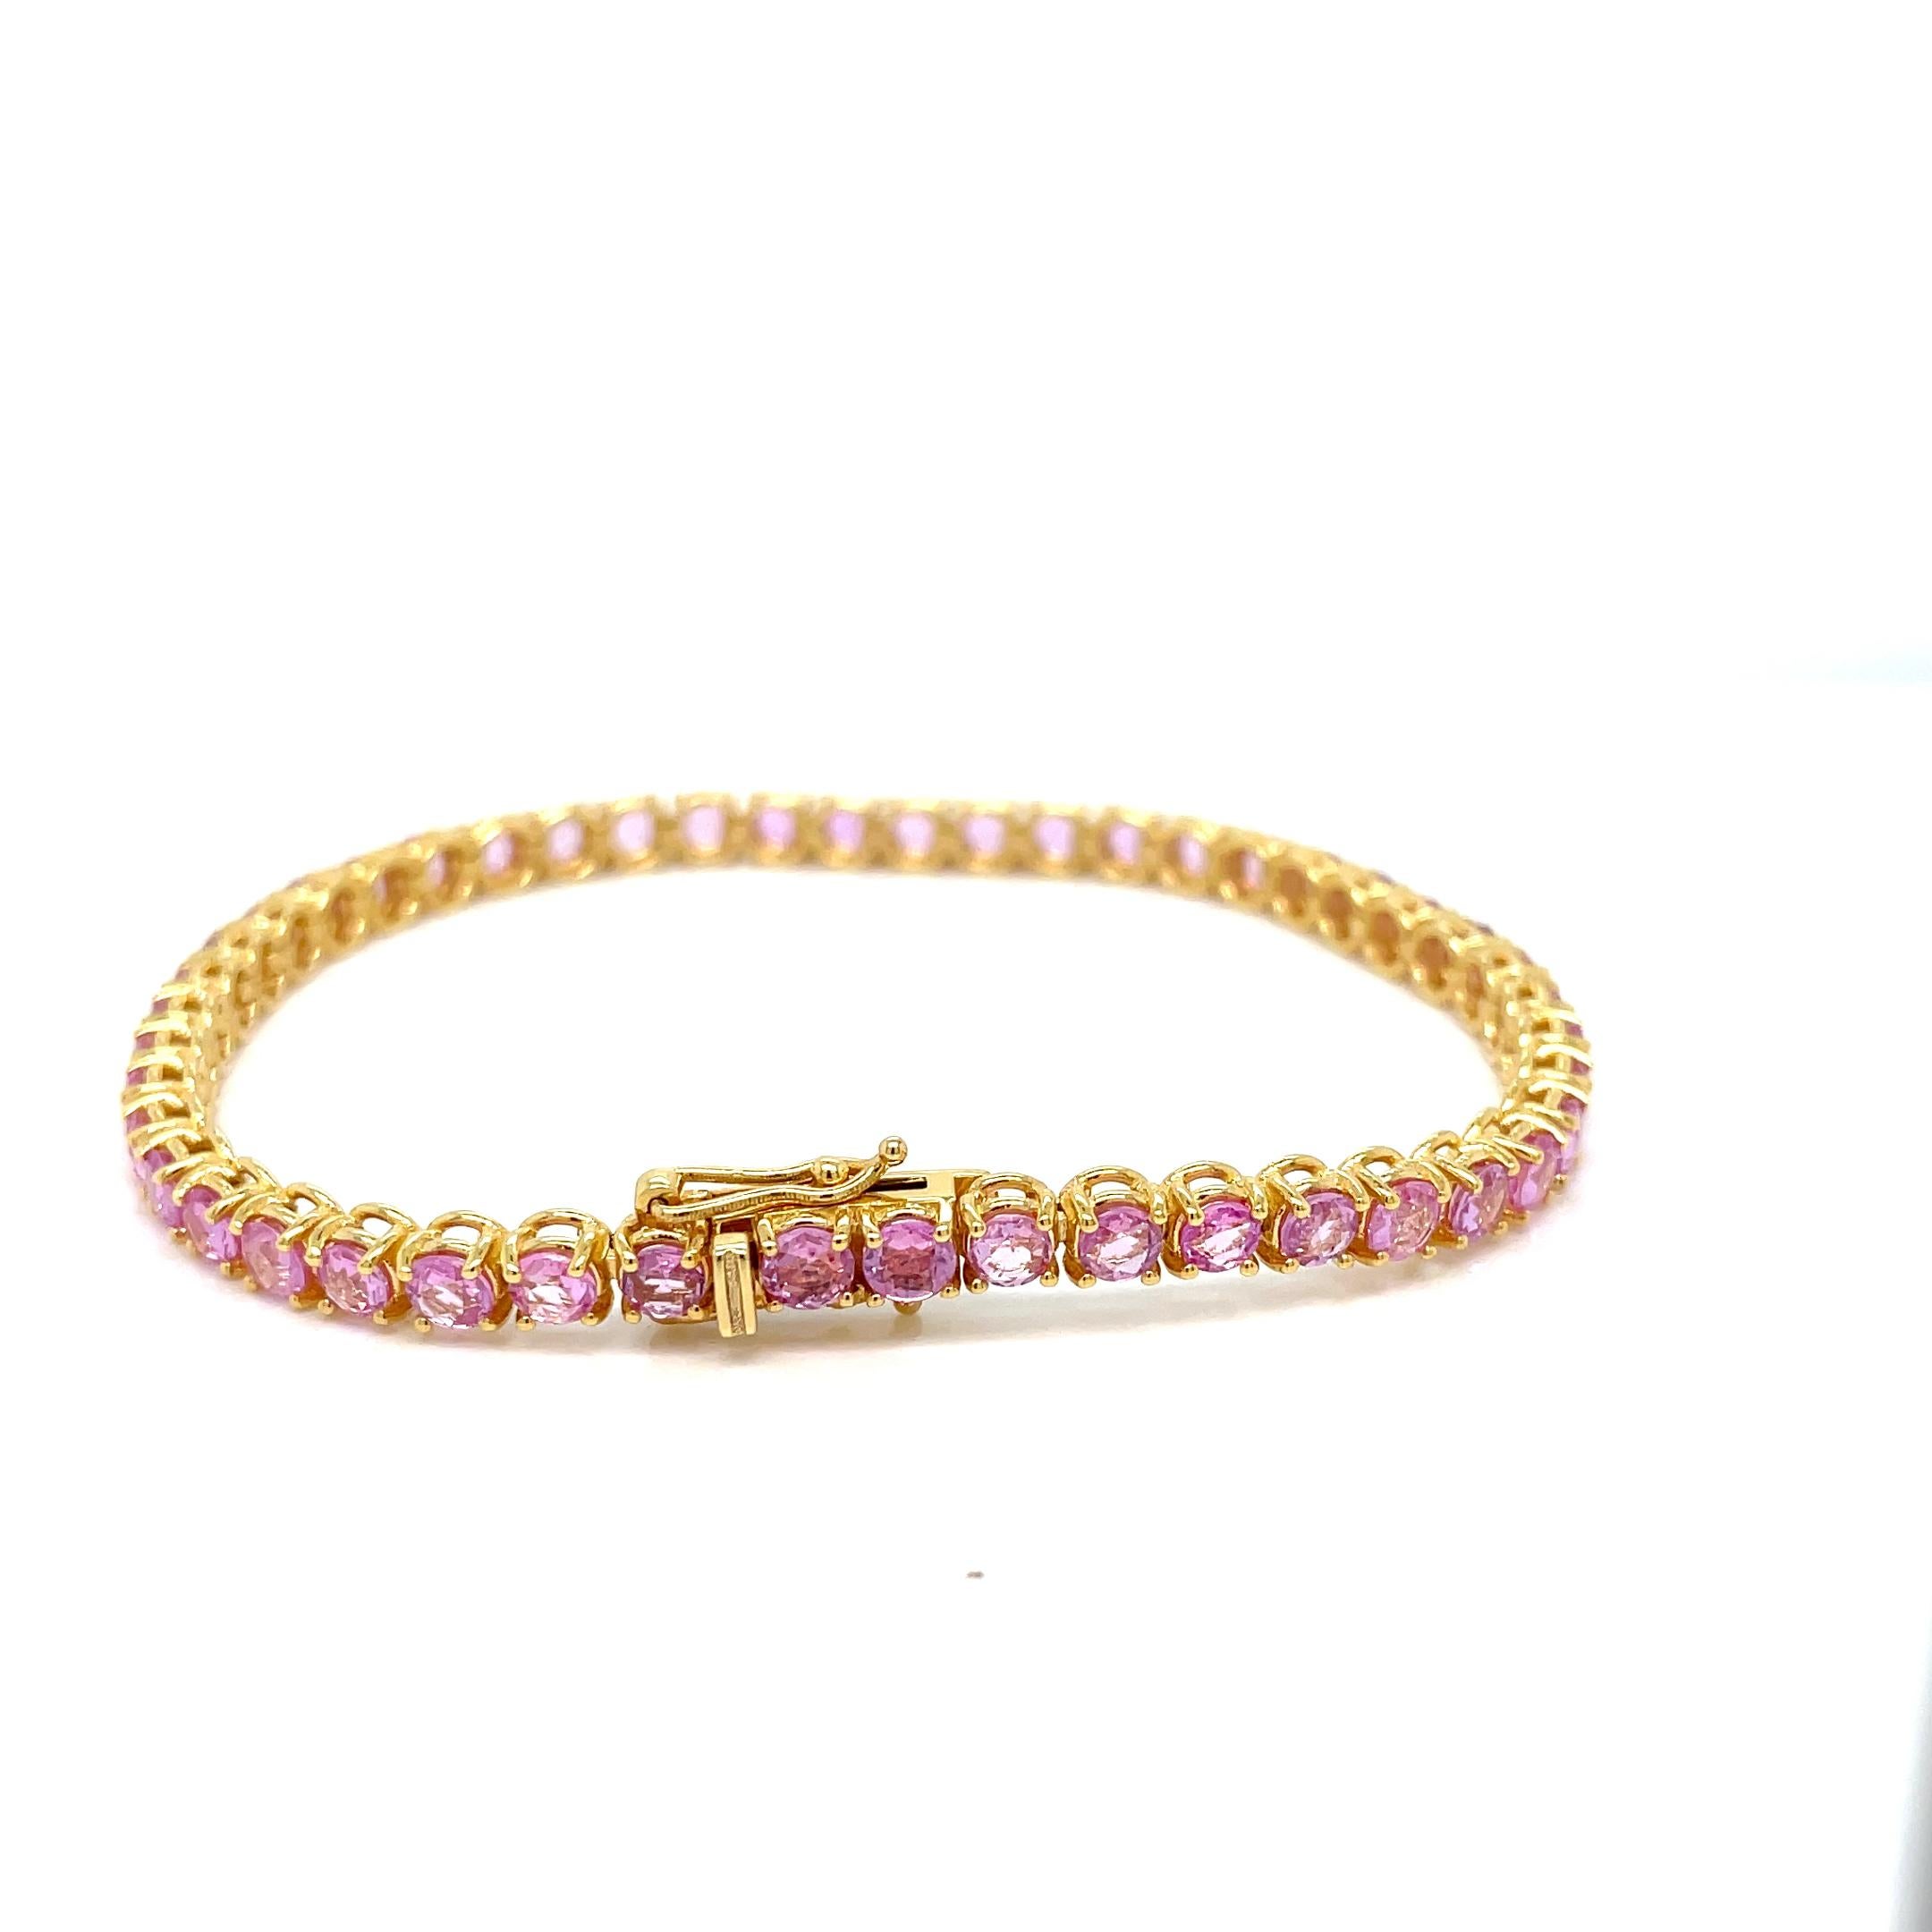 10 Carat Natural Pink Sapphire Yellow Gold Tennis Bracelet For Sale 1